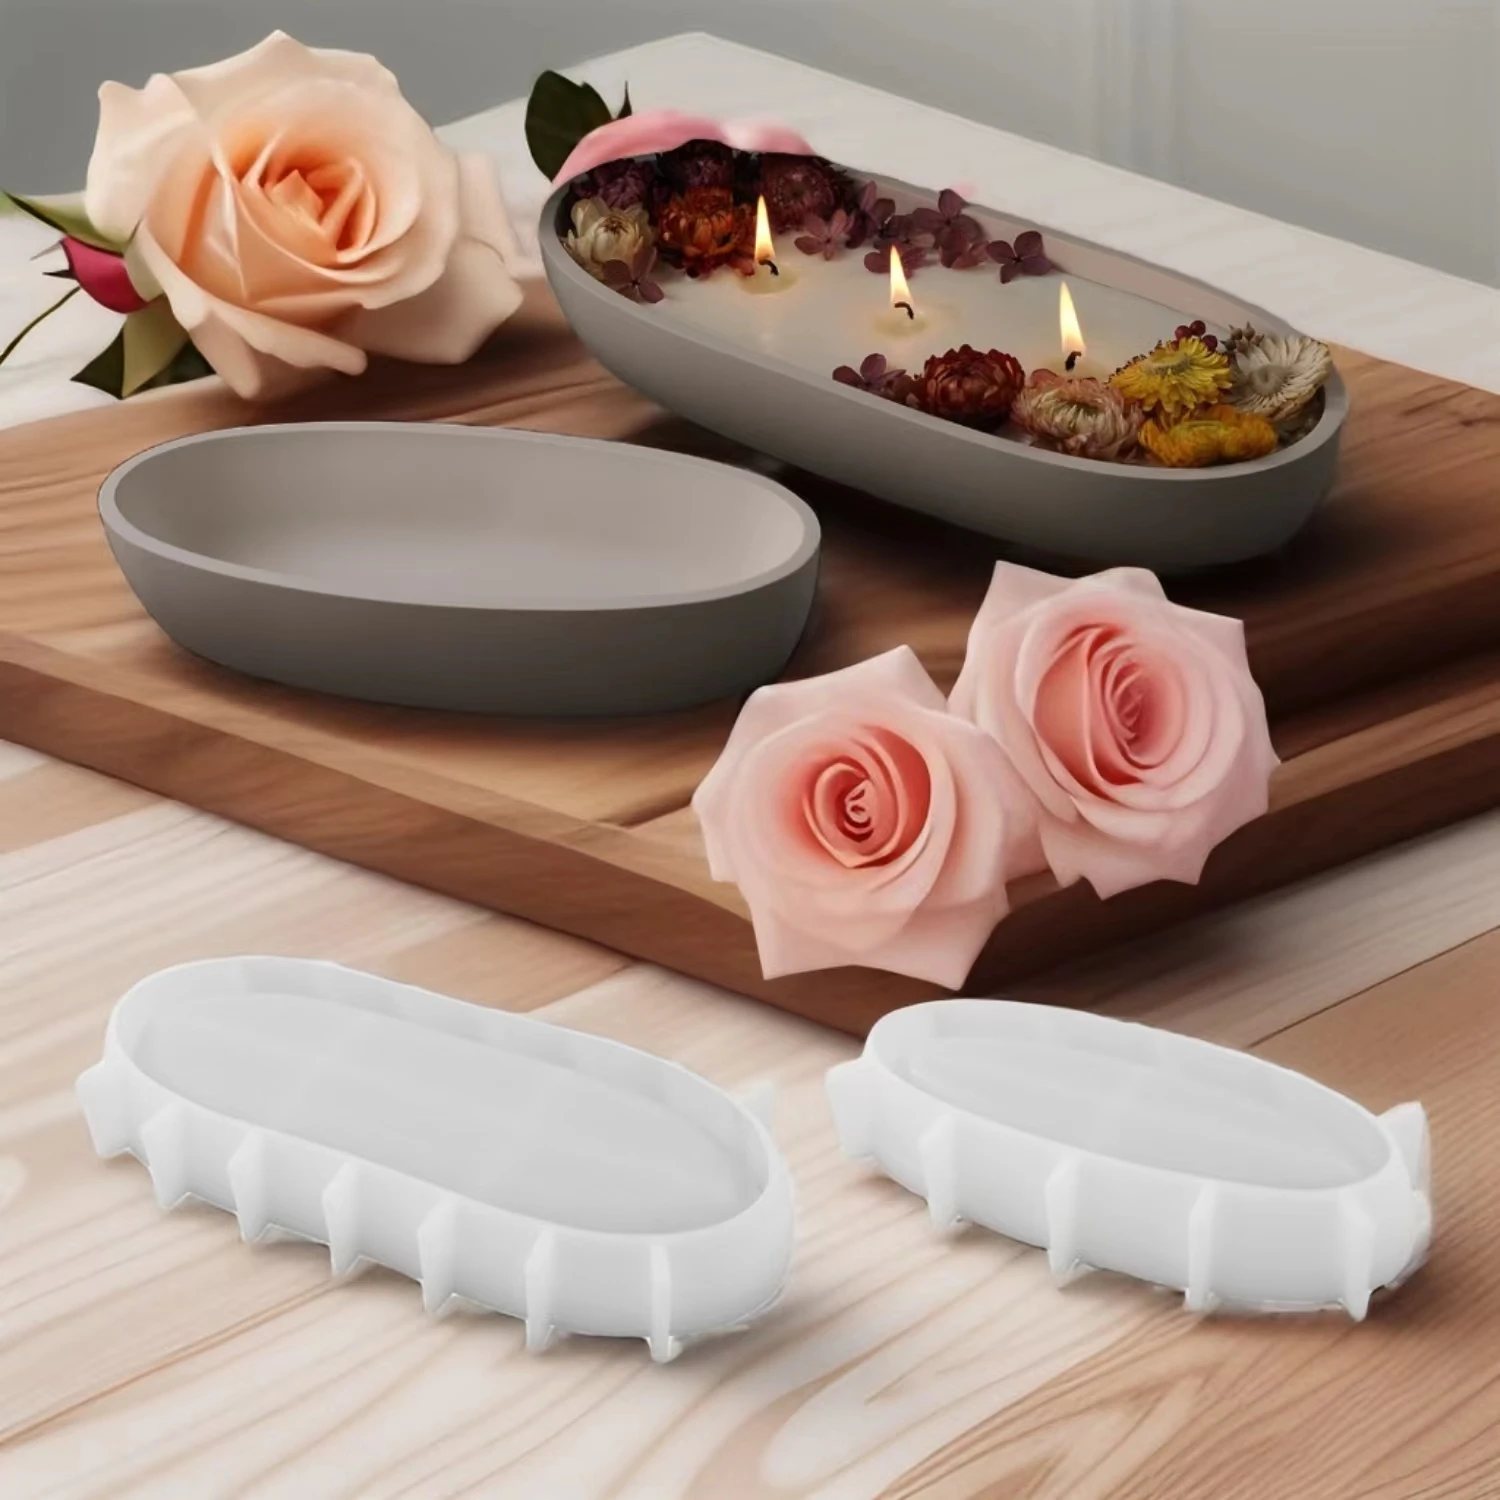 

Oval Cement Gypsum Candle Aromatherapy Storage Silicone Mold DIY Epoxy Tray Resin Mold Home Gardening Decorative Flowerpot Mold